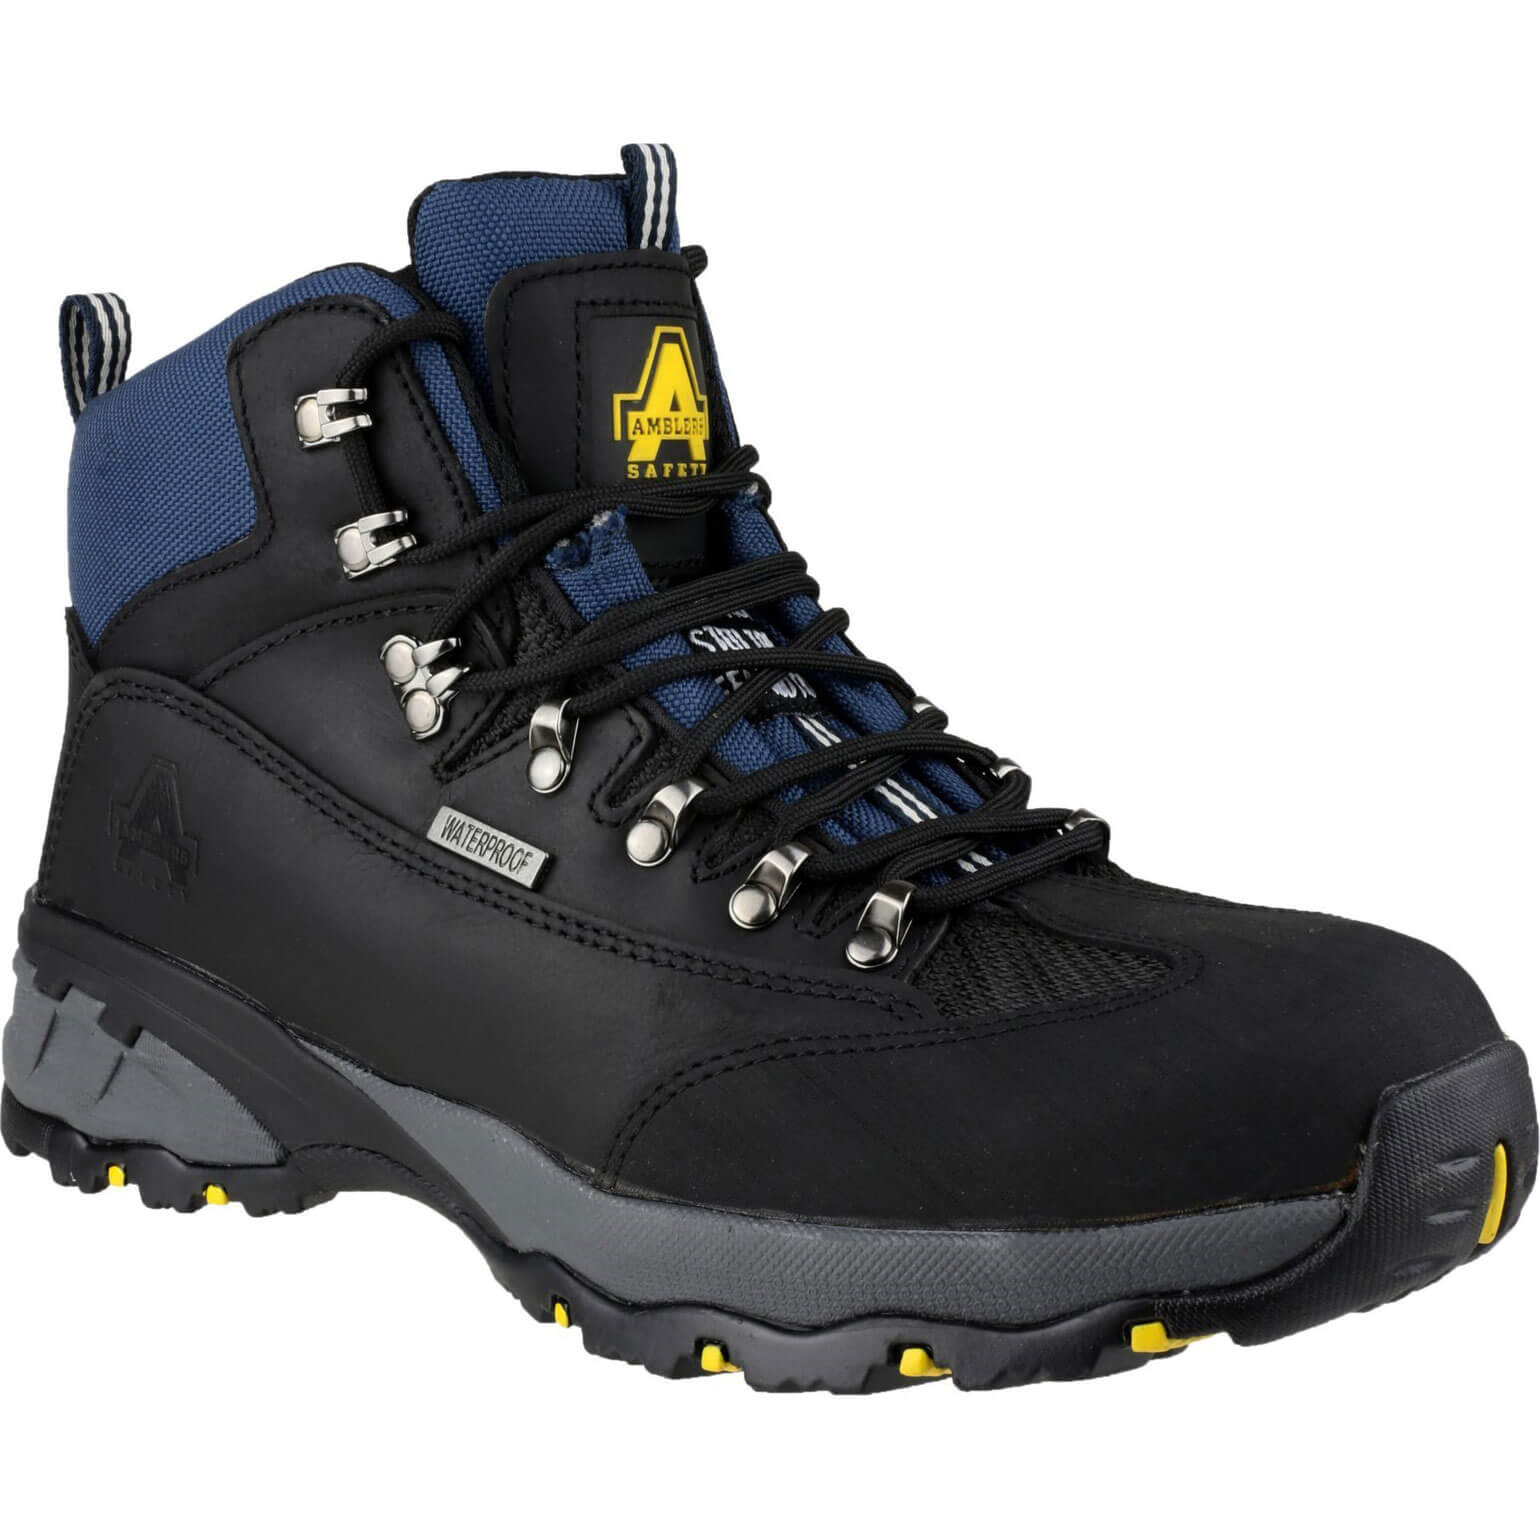 Image of Amblers Mens Safety FS161 Waterproof Hiker Safety Boots Black Size 10